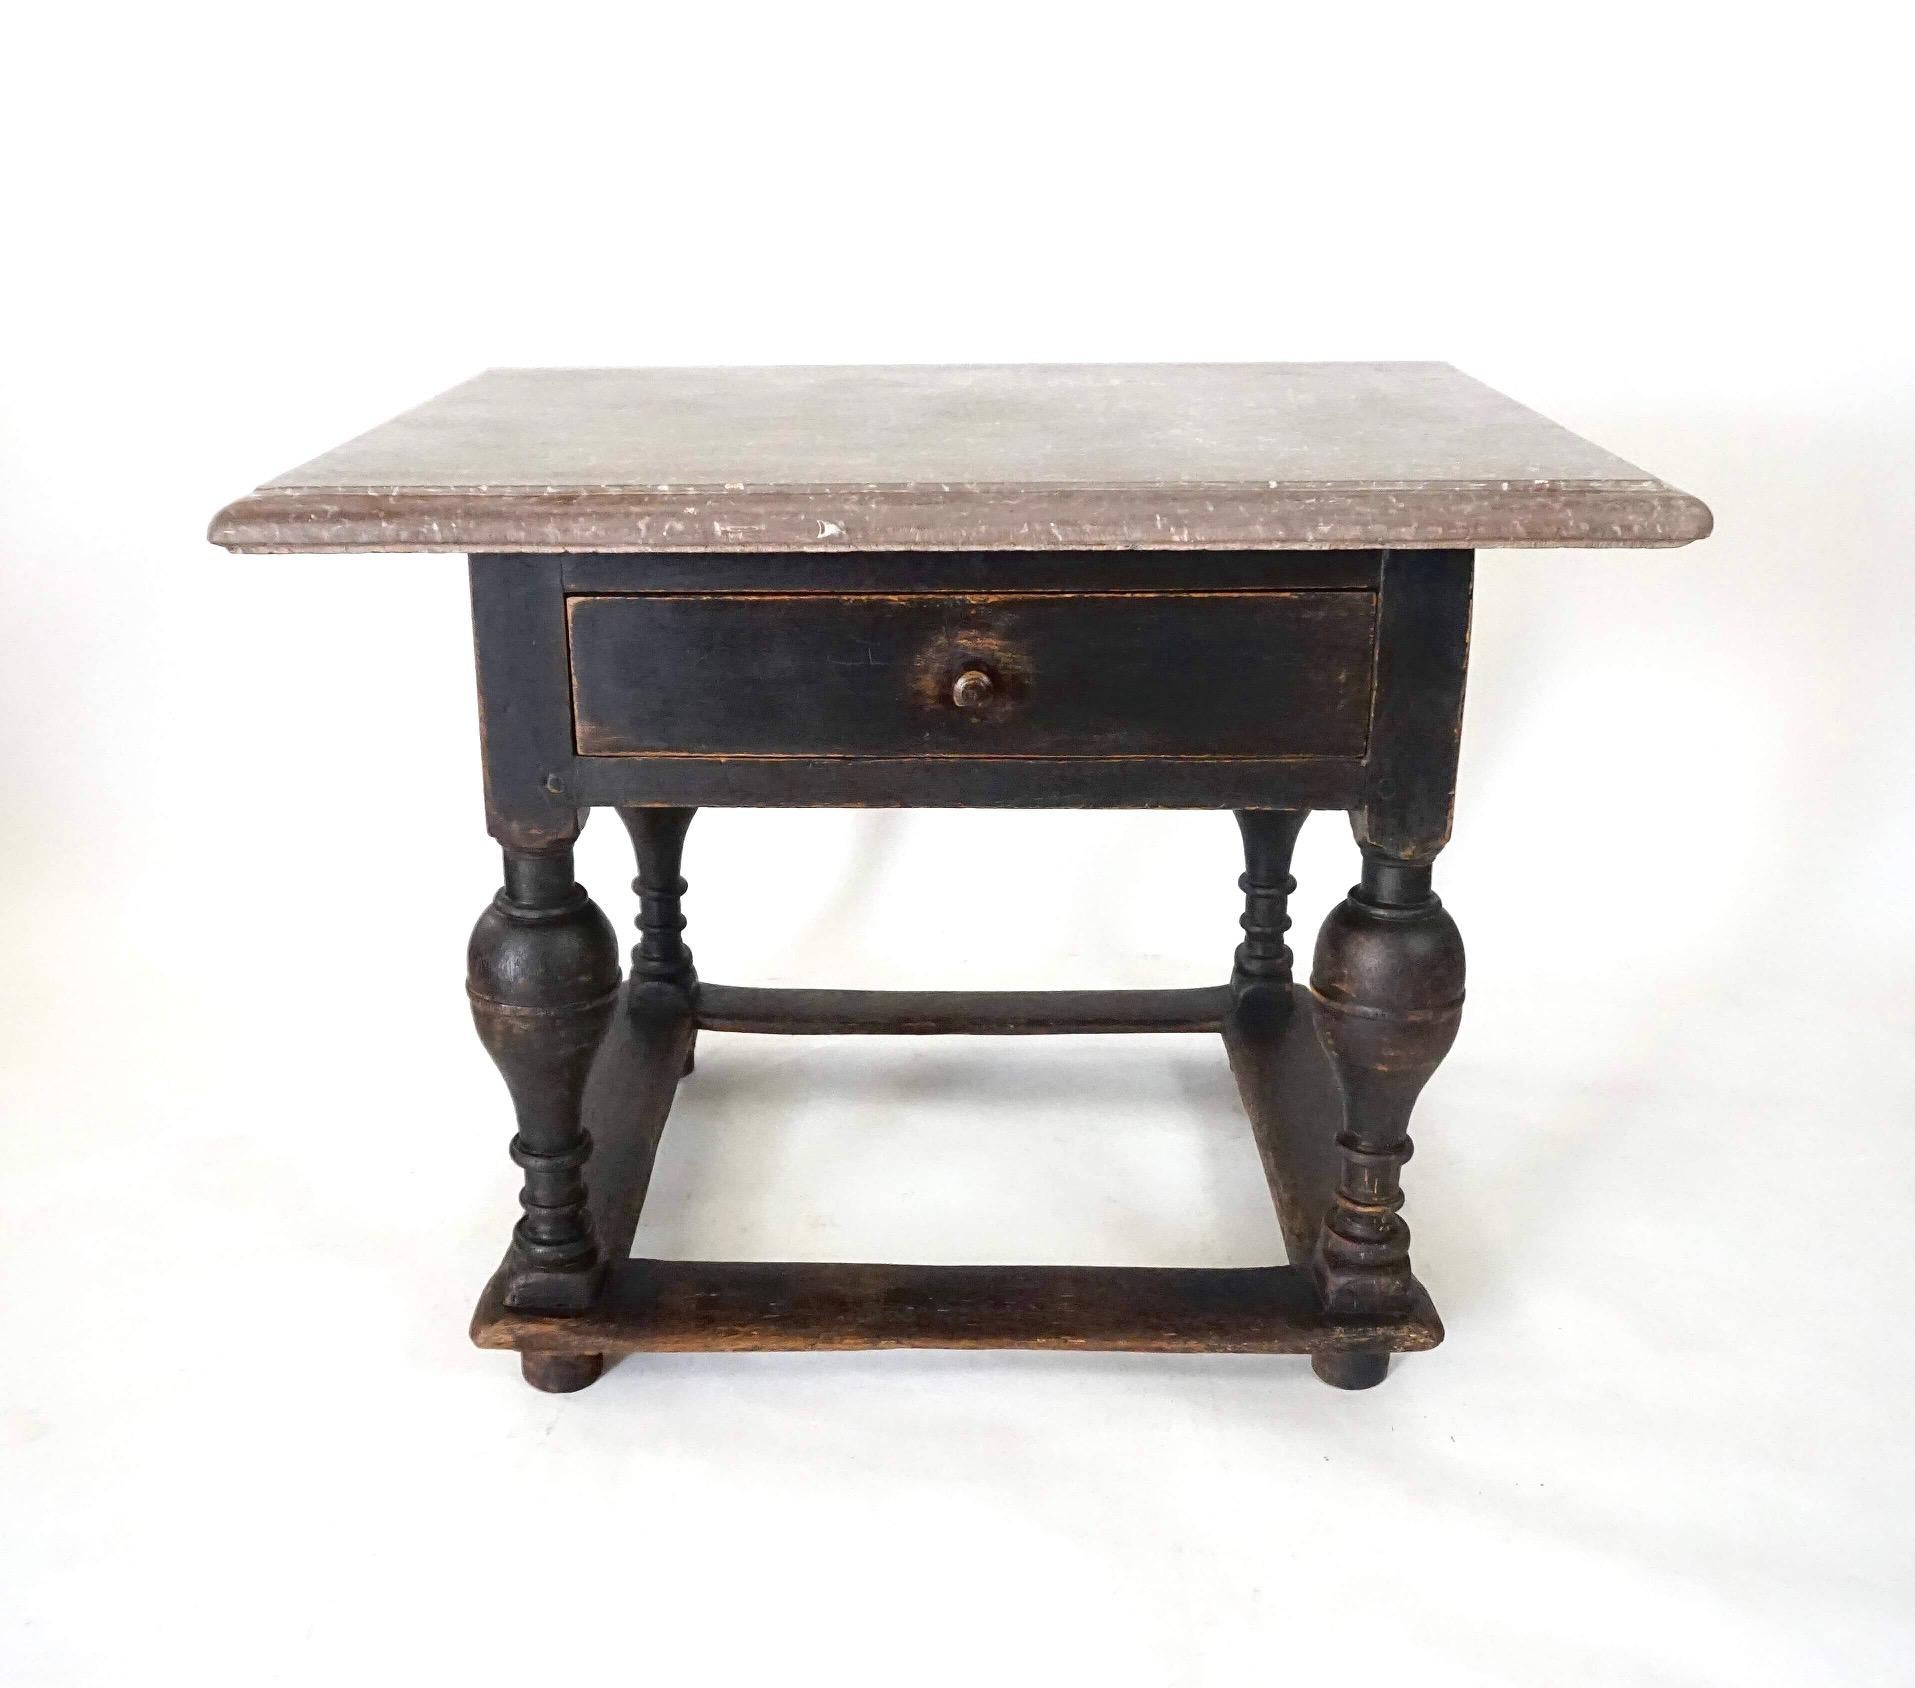 A circa 1750 Swedish baroque period table with original spectacularly mottled Öland limestone top resting on oak base in original black paint with single drawer and stretchered baluster-turned supports. Would make an excellent baking or pastry table